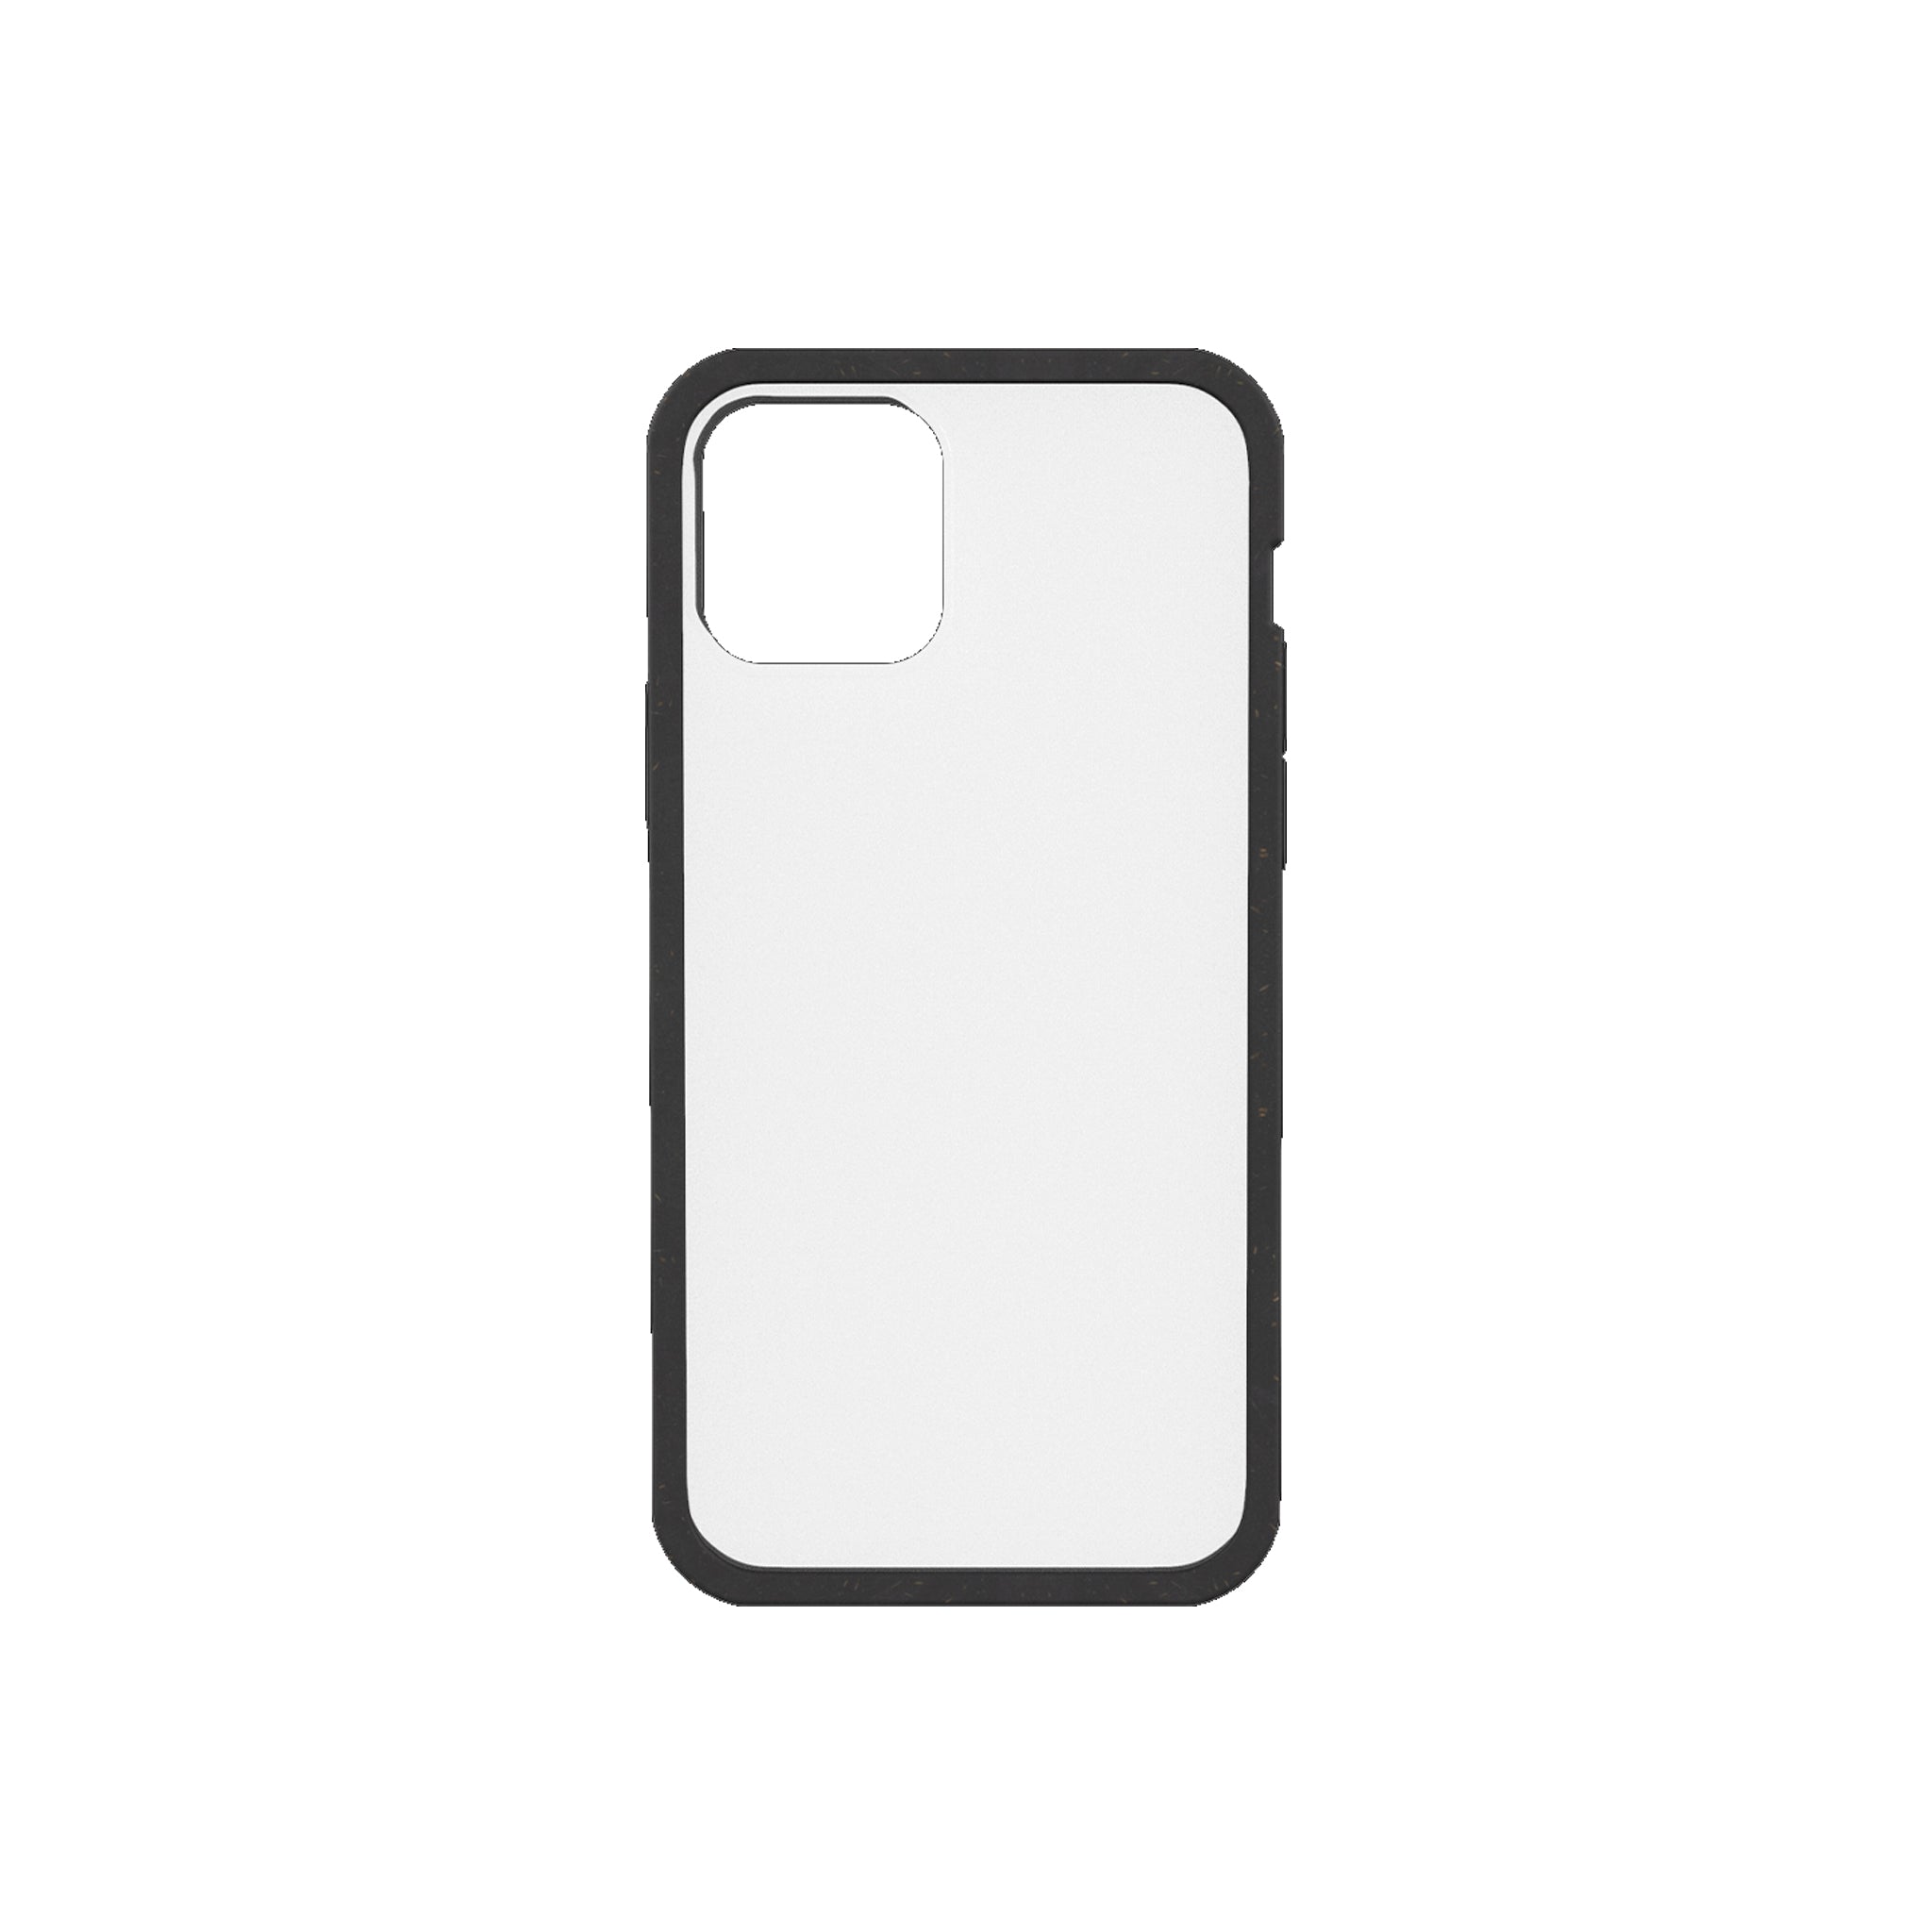 Pela - Clear Case For Apple Iphone 12 / 12 Pro - Black Ridge And Clear